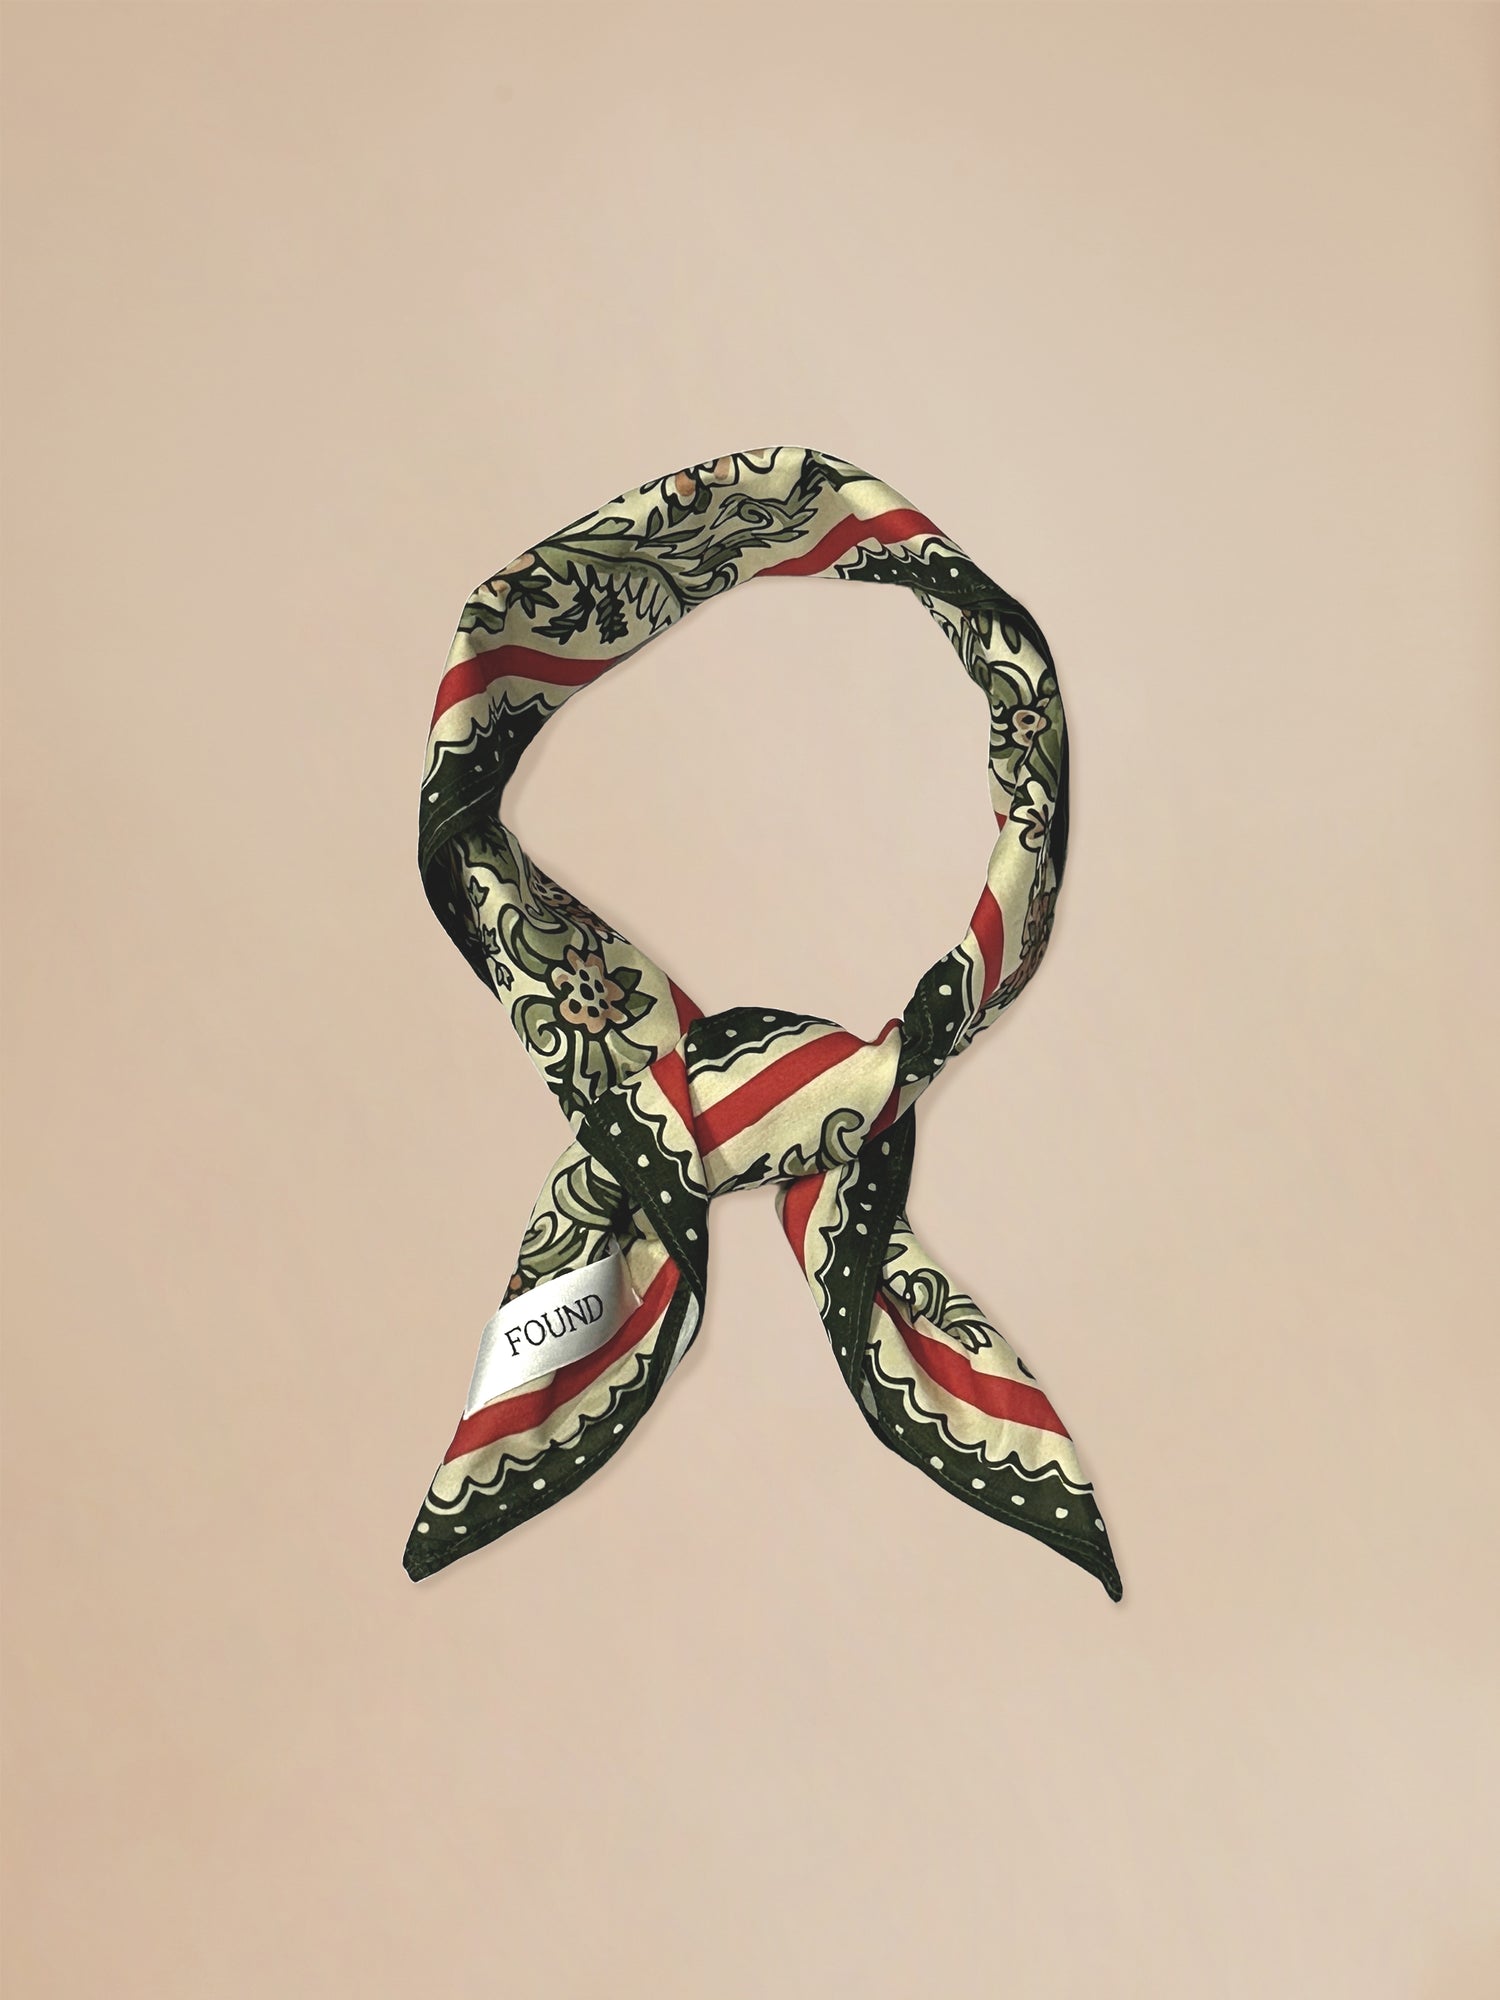 A Floral Garden Bandana with a red, white and blue pattern by Found.